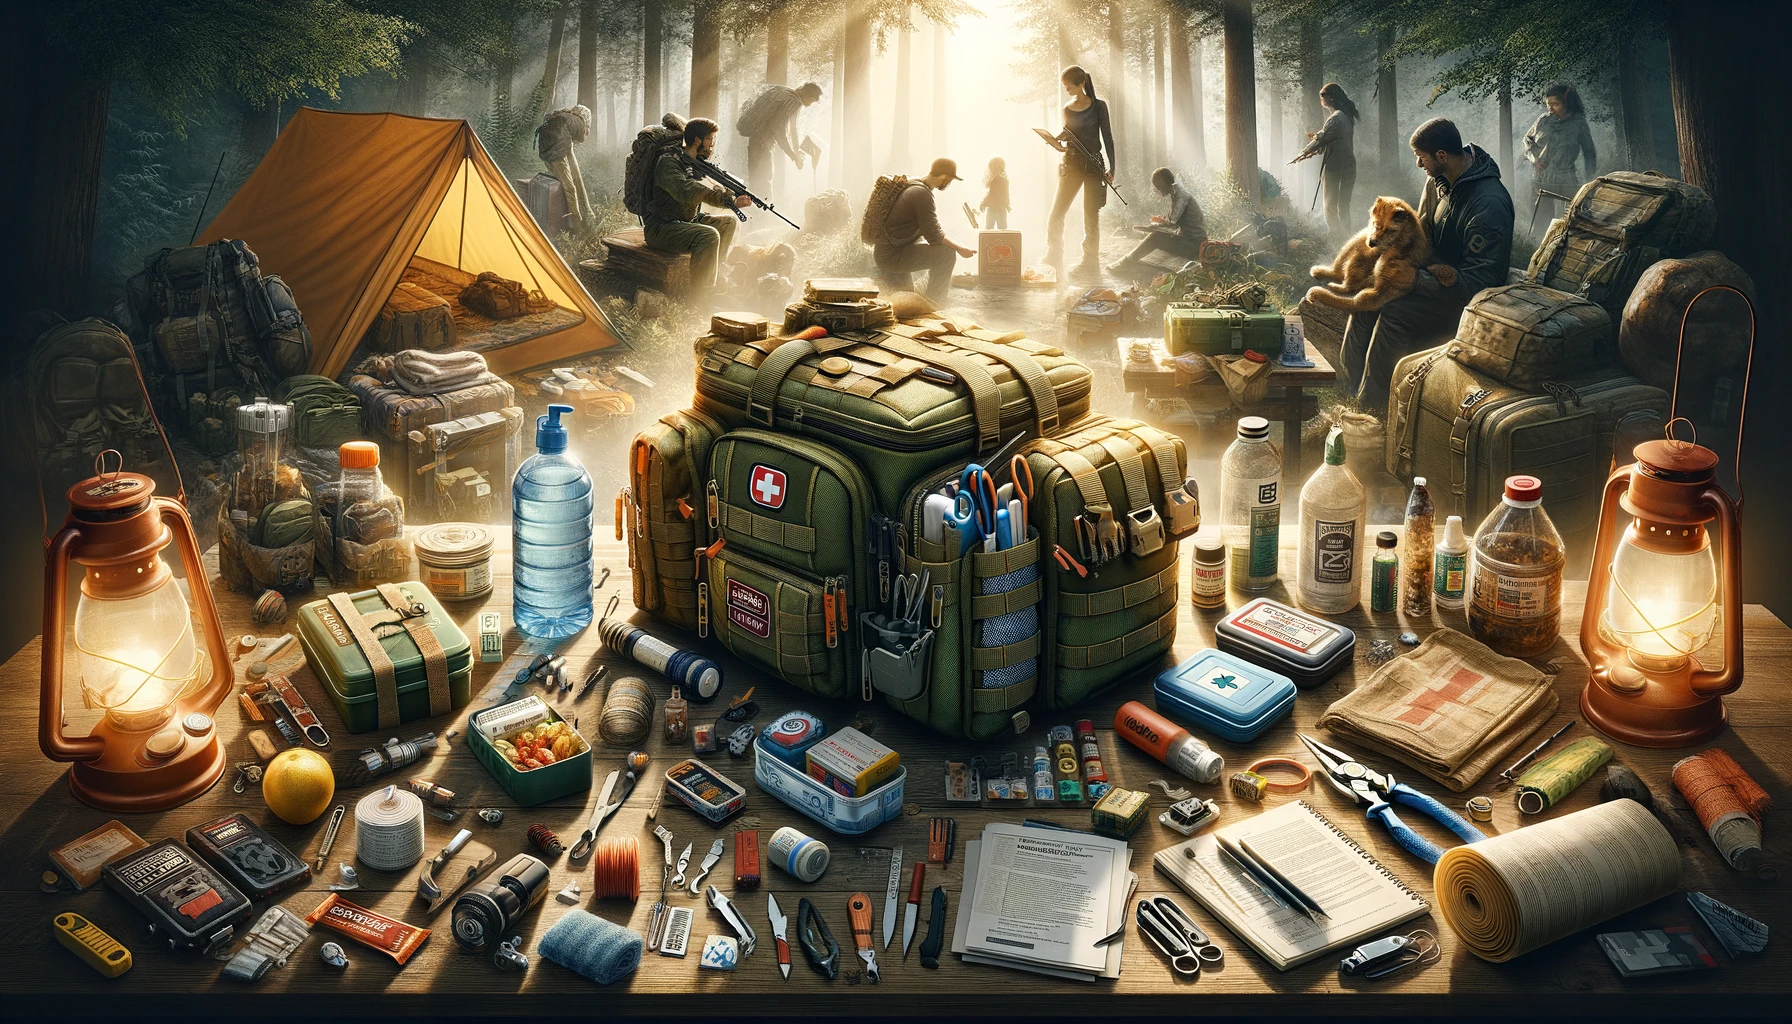 A detailed scene showing individuals organizing a versatile bug out bag with essential survival items including water filtration devices, first aid kits, multi-tools, emergency food supplies, and lightweight shelter, emphasizing the importance and readiness for emergency situations.